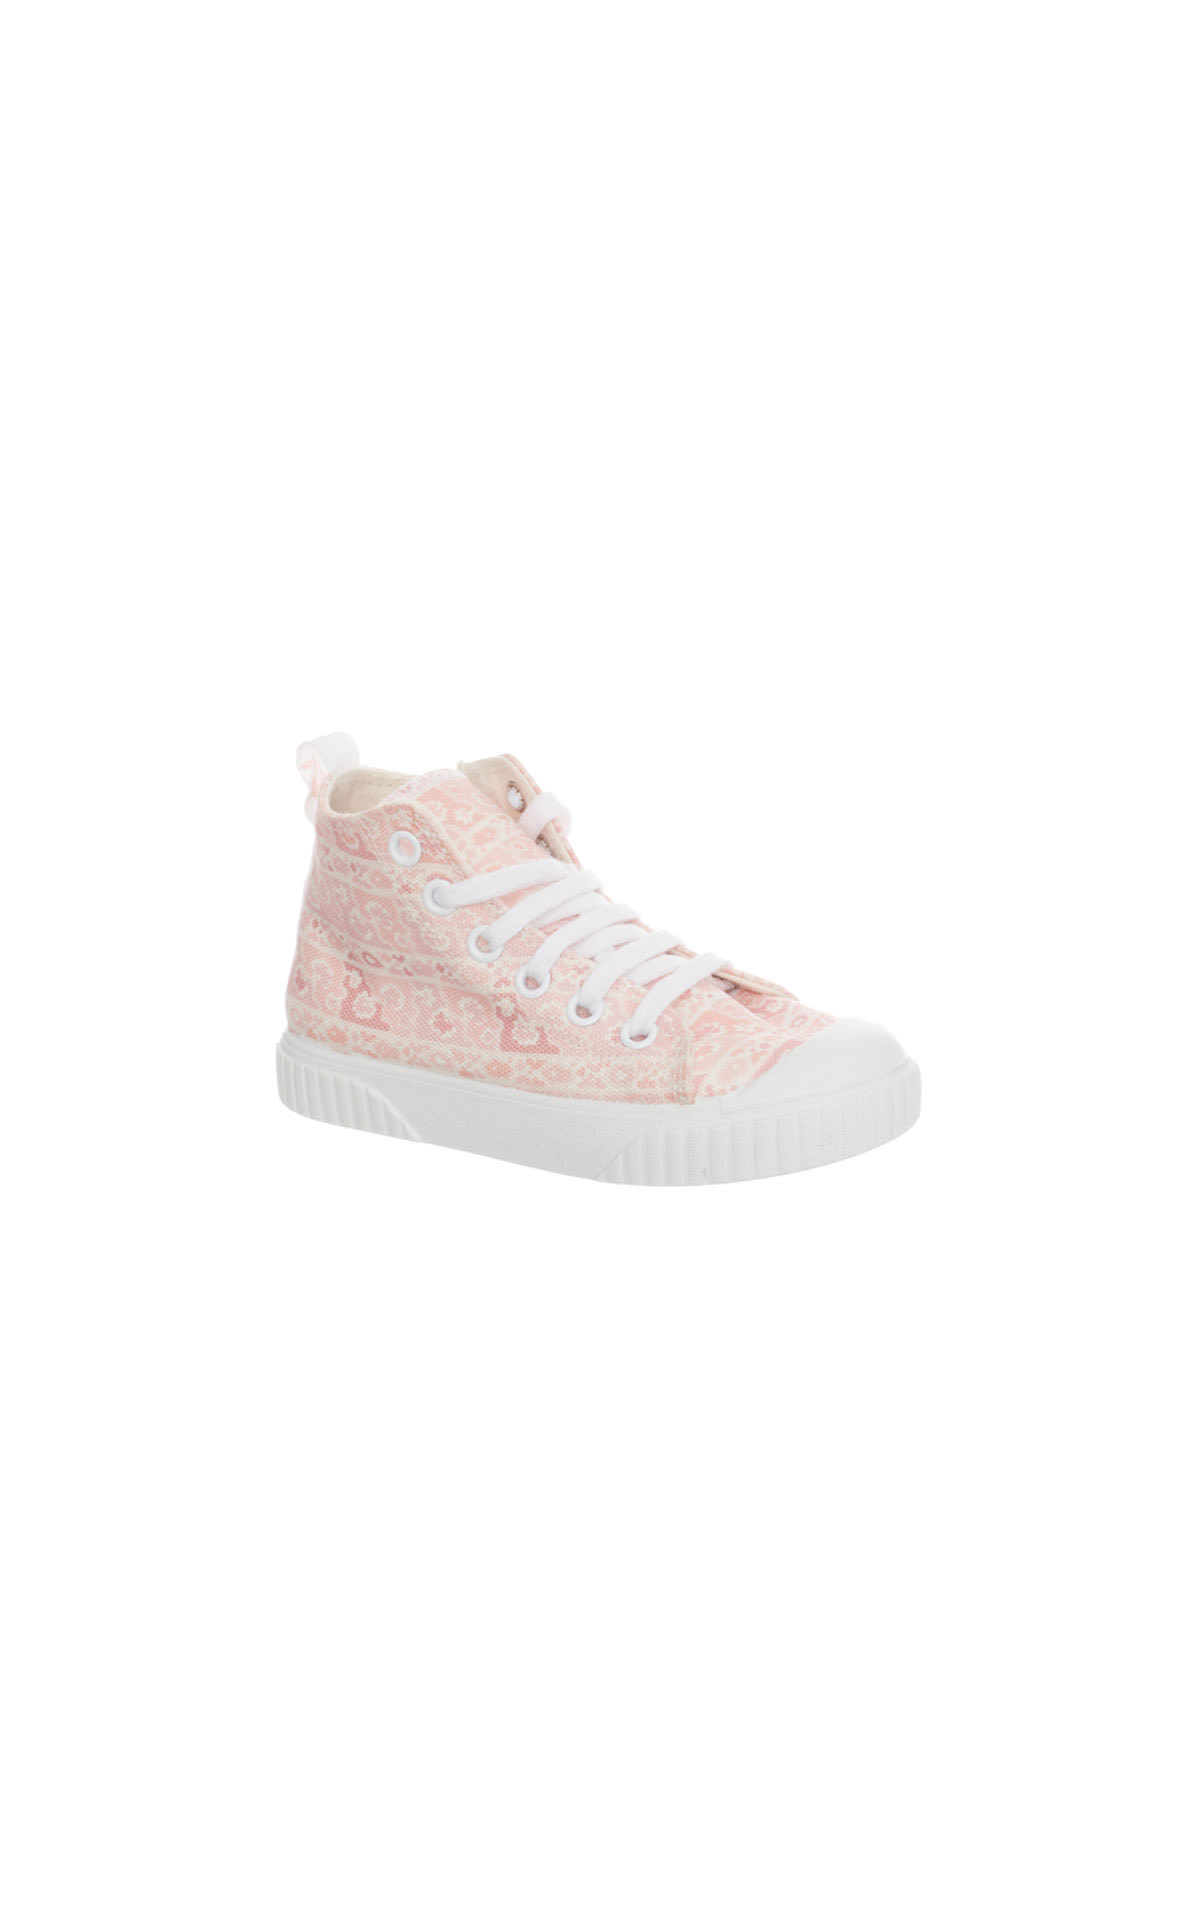 Bonpoint Pink tennis shoes from Bicester Village